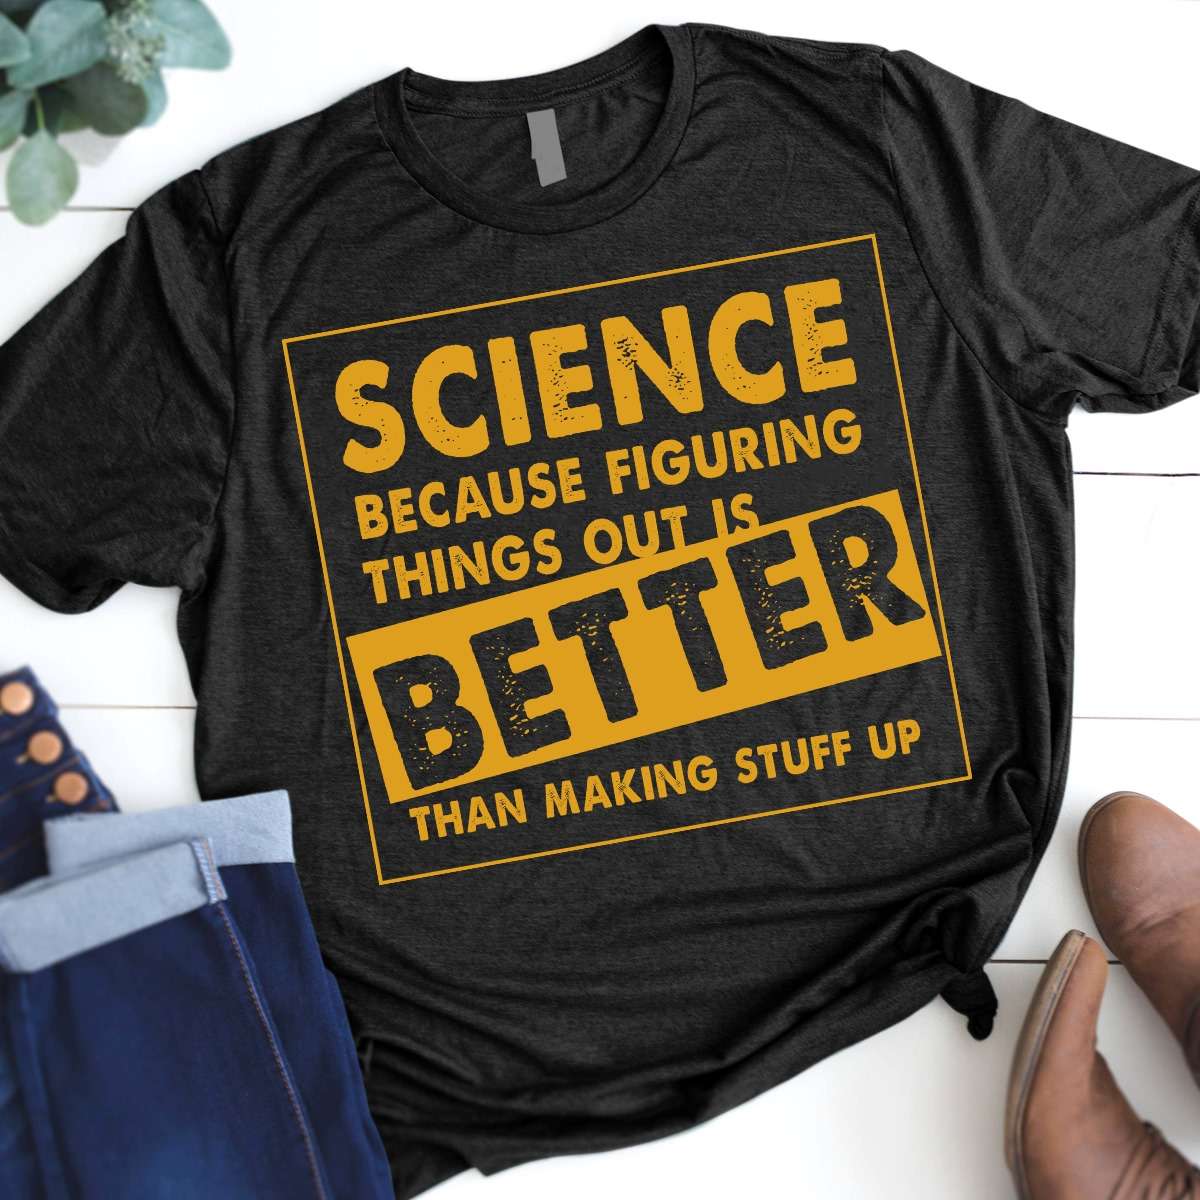 Science because figuring things out is better than making stuff up - Science the knowledge